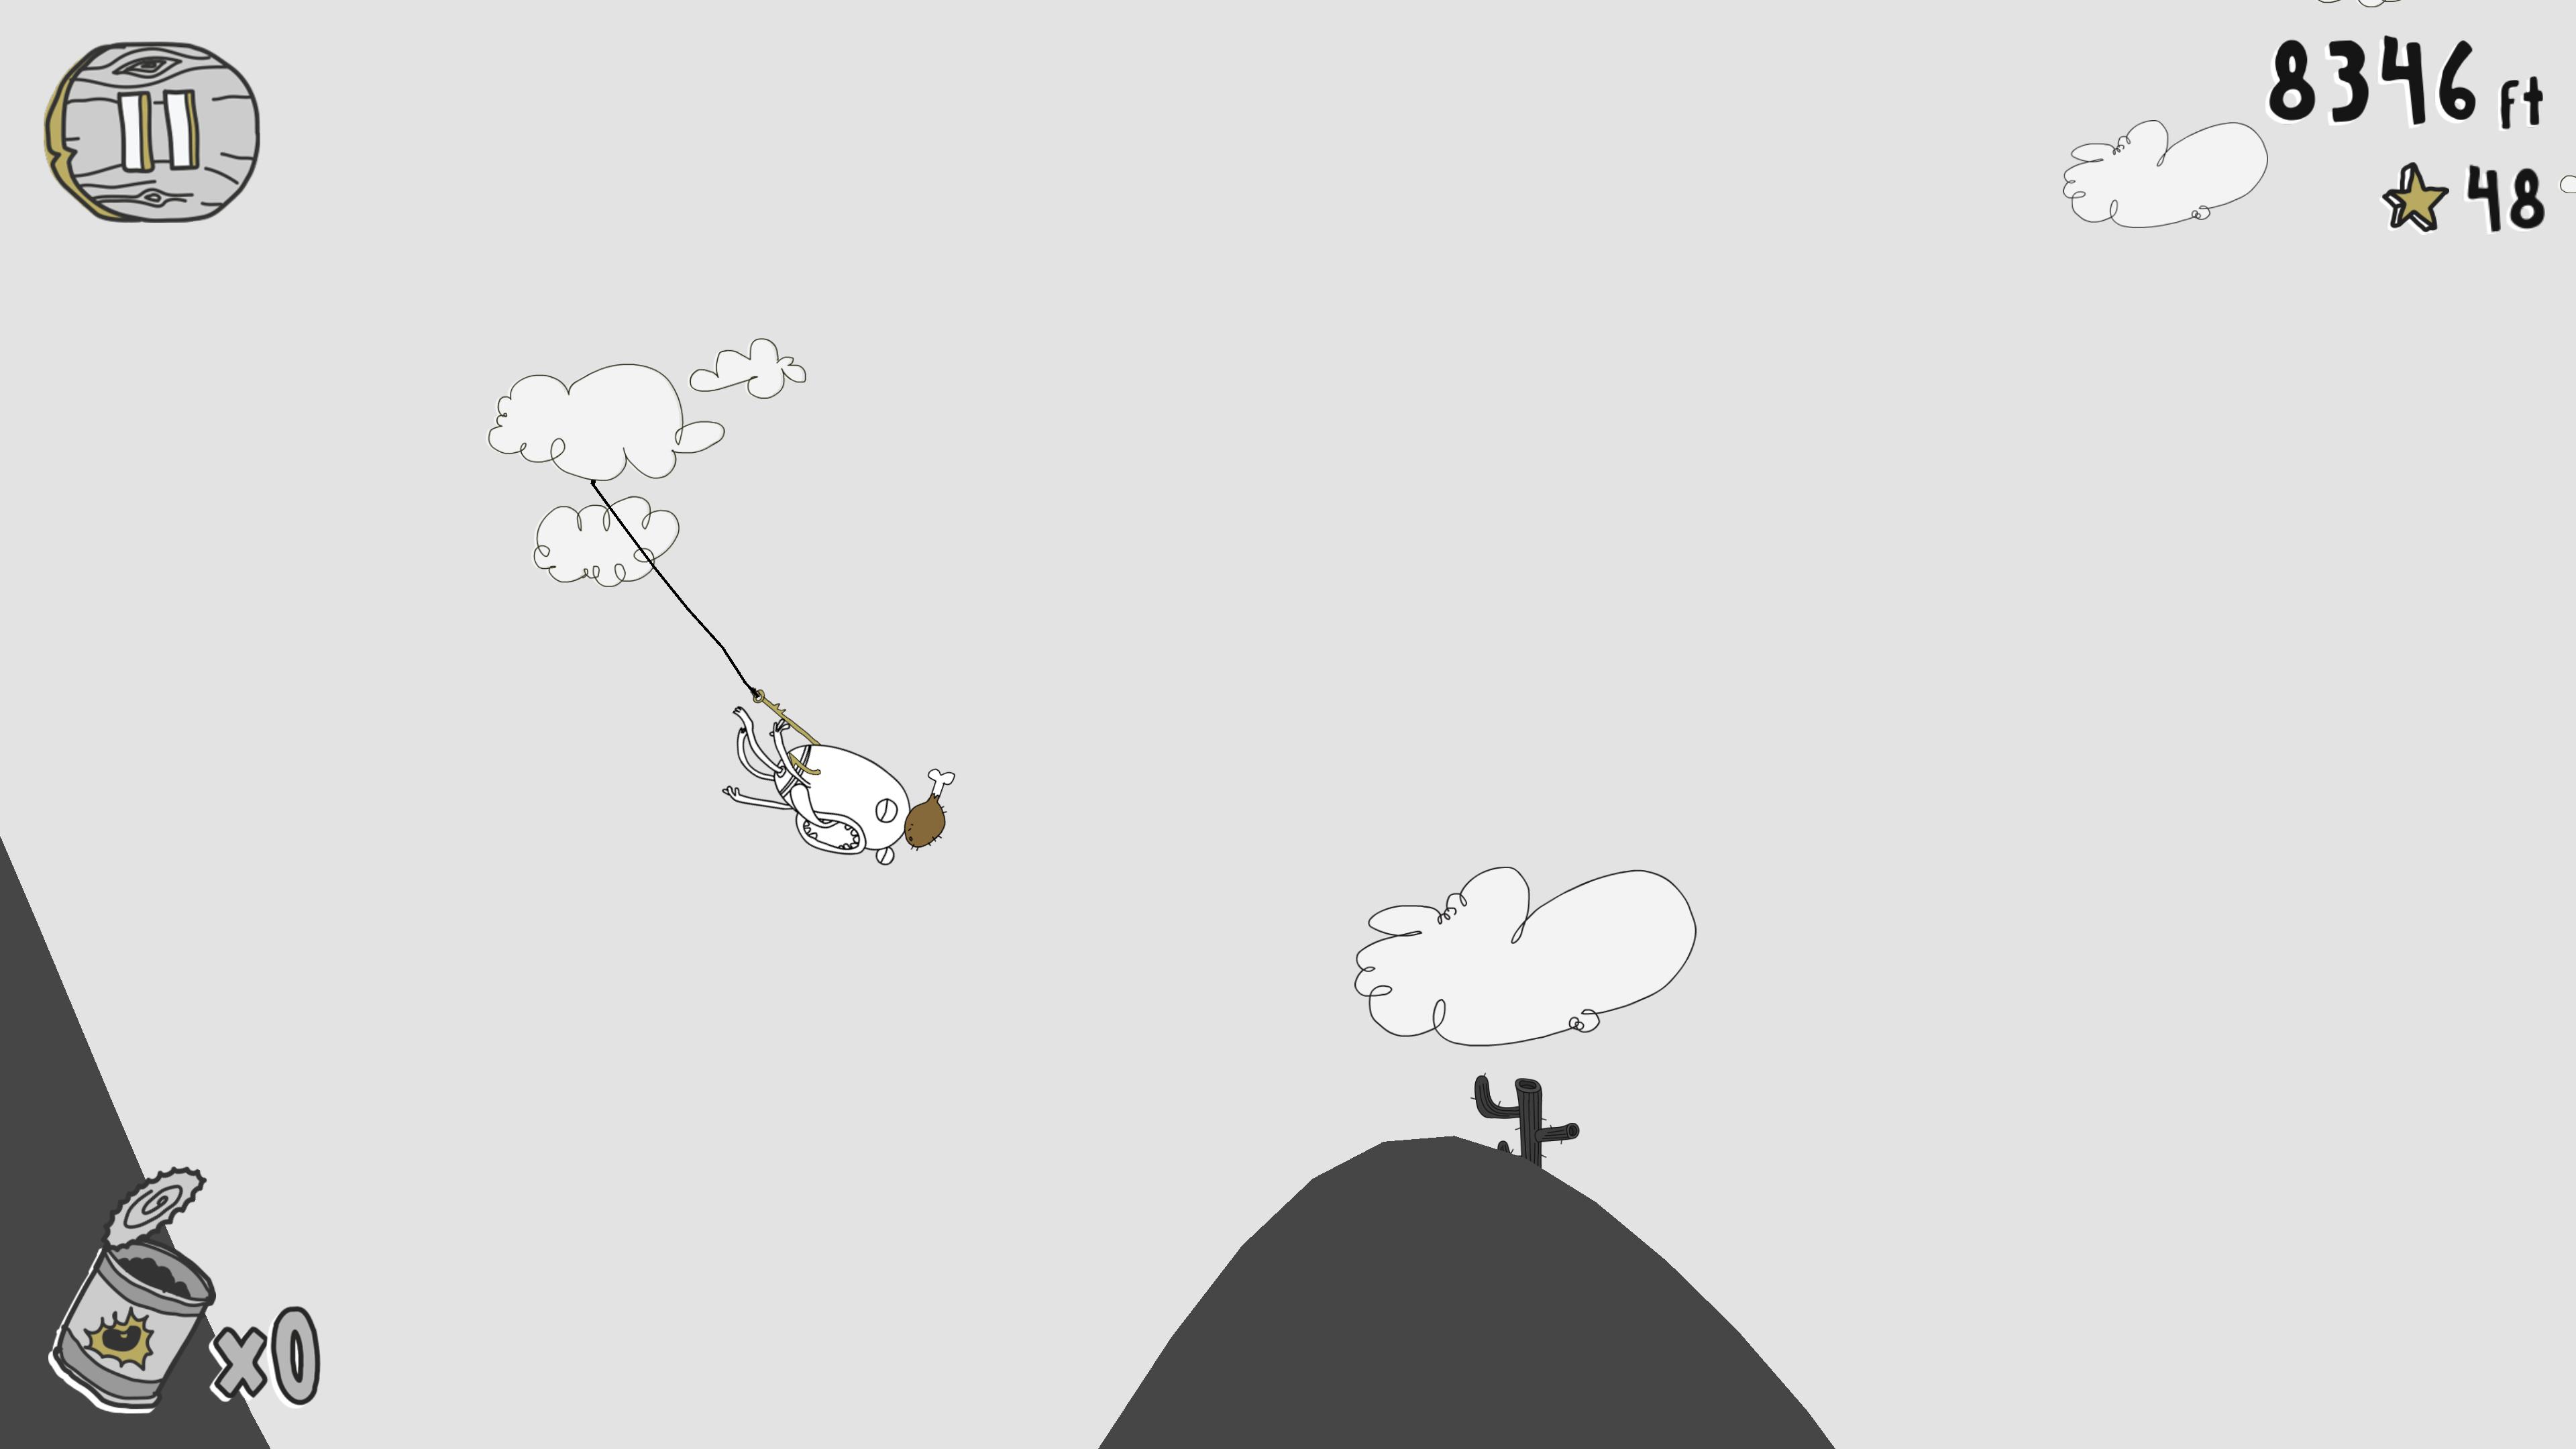 Doofus Drop Silly Rider - Learn to Fart & Fly 1.0.23 Screenshot 8